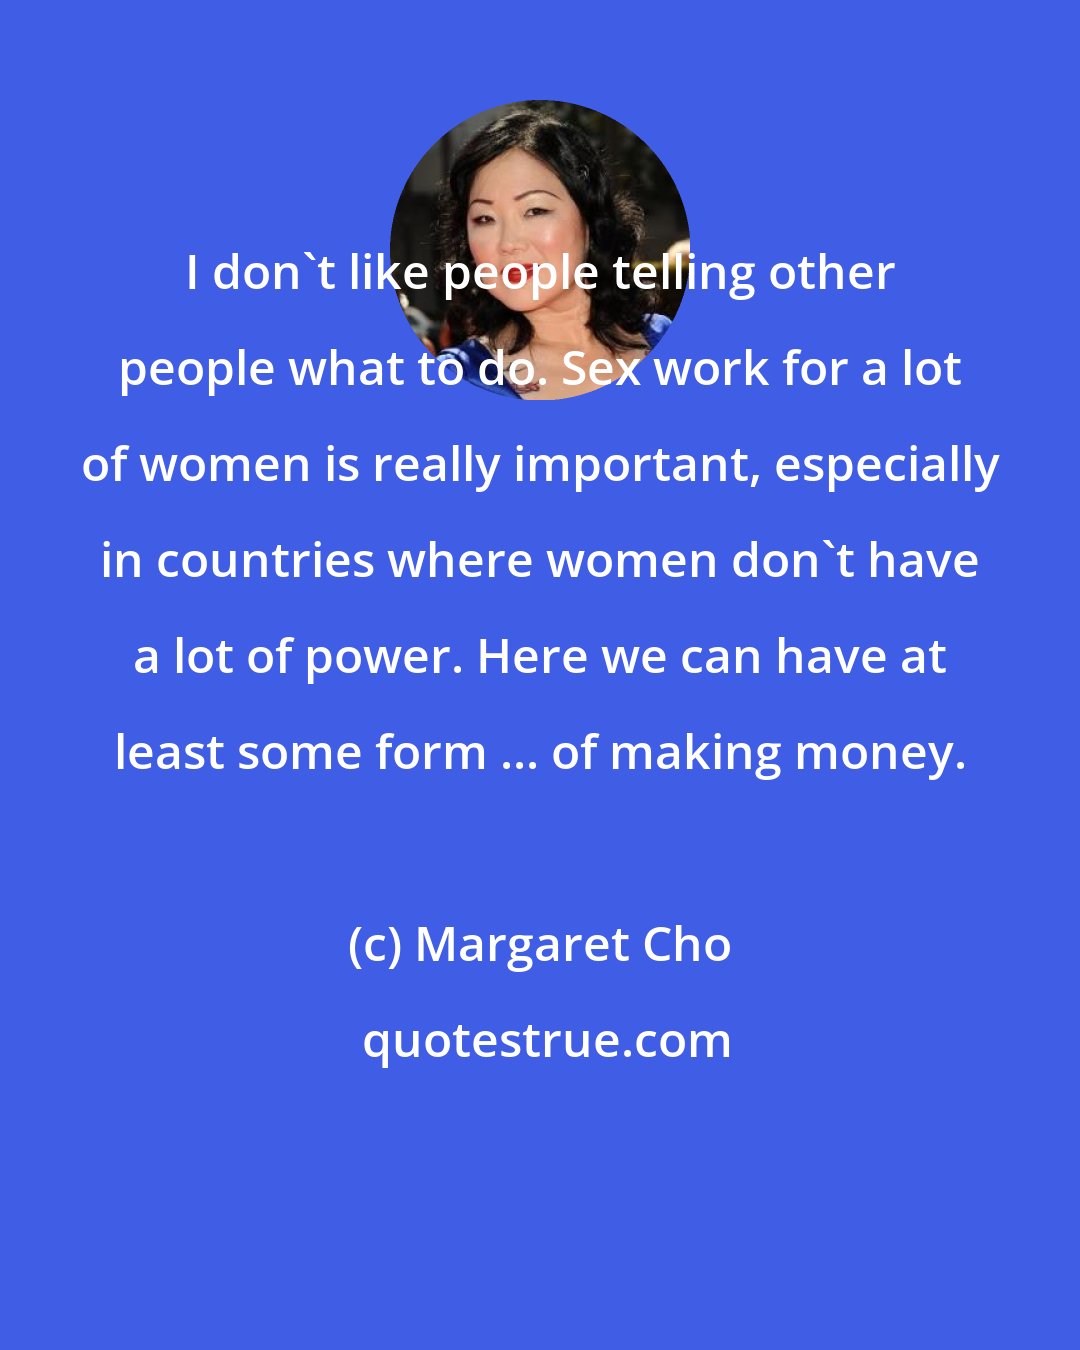 Margaret Cho: I don't like people telling other people what to do. Sex work for a lot of women is really important, especially in countries where women don't have a lot of power. Here we can have at least some form ... of making money.